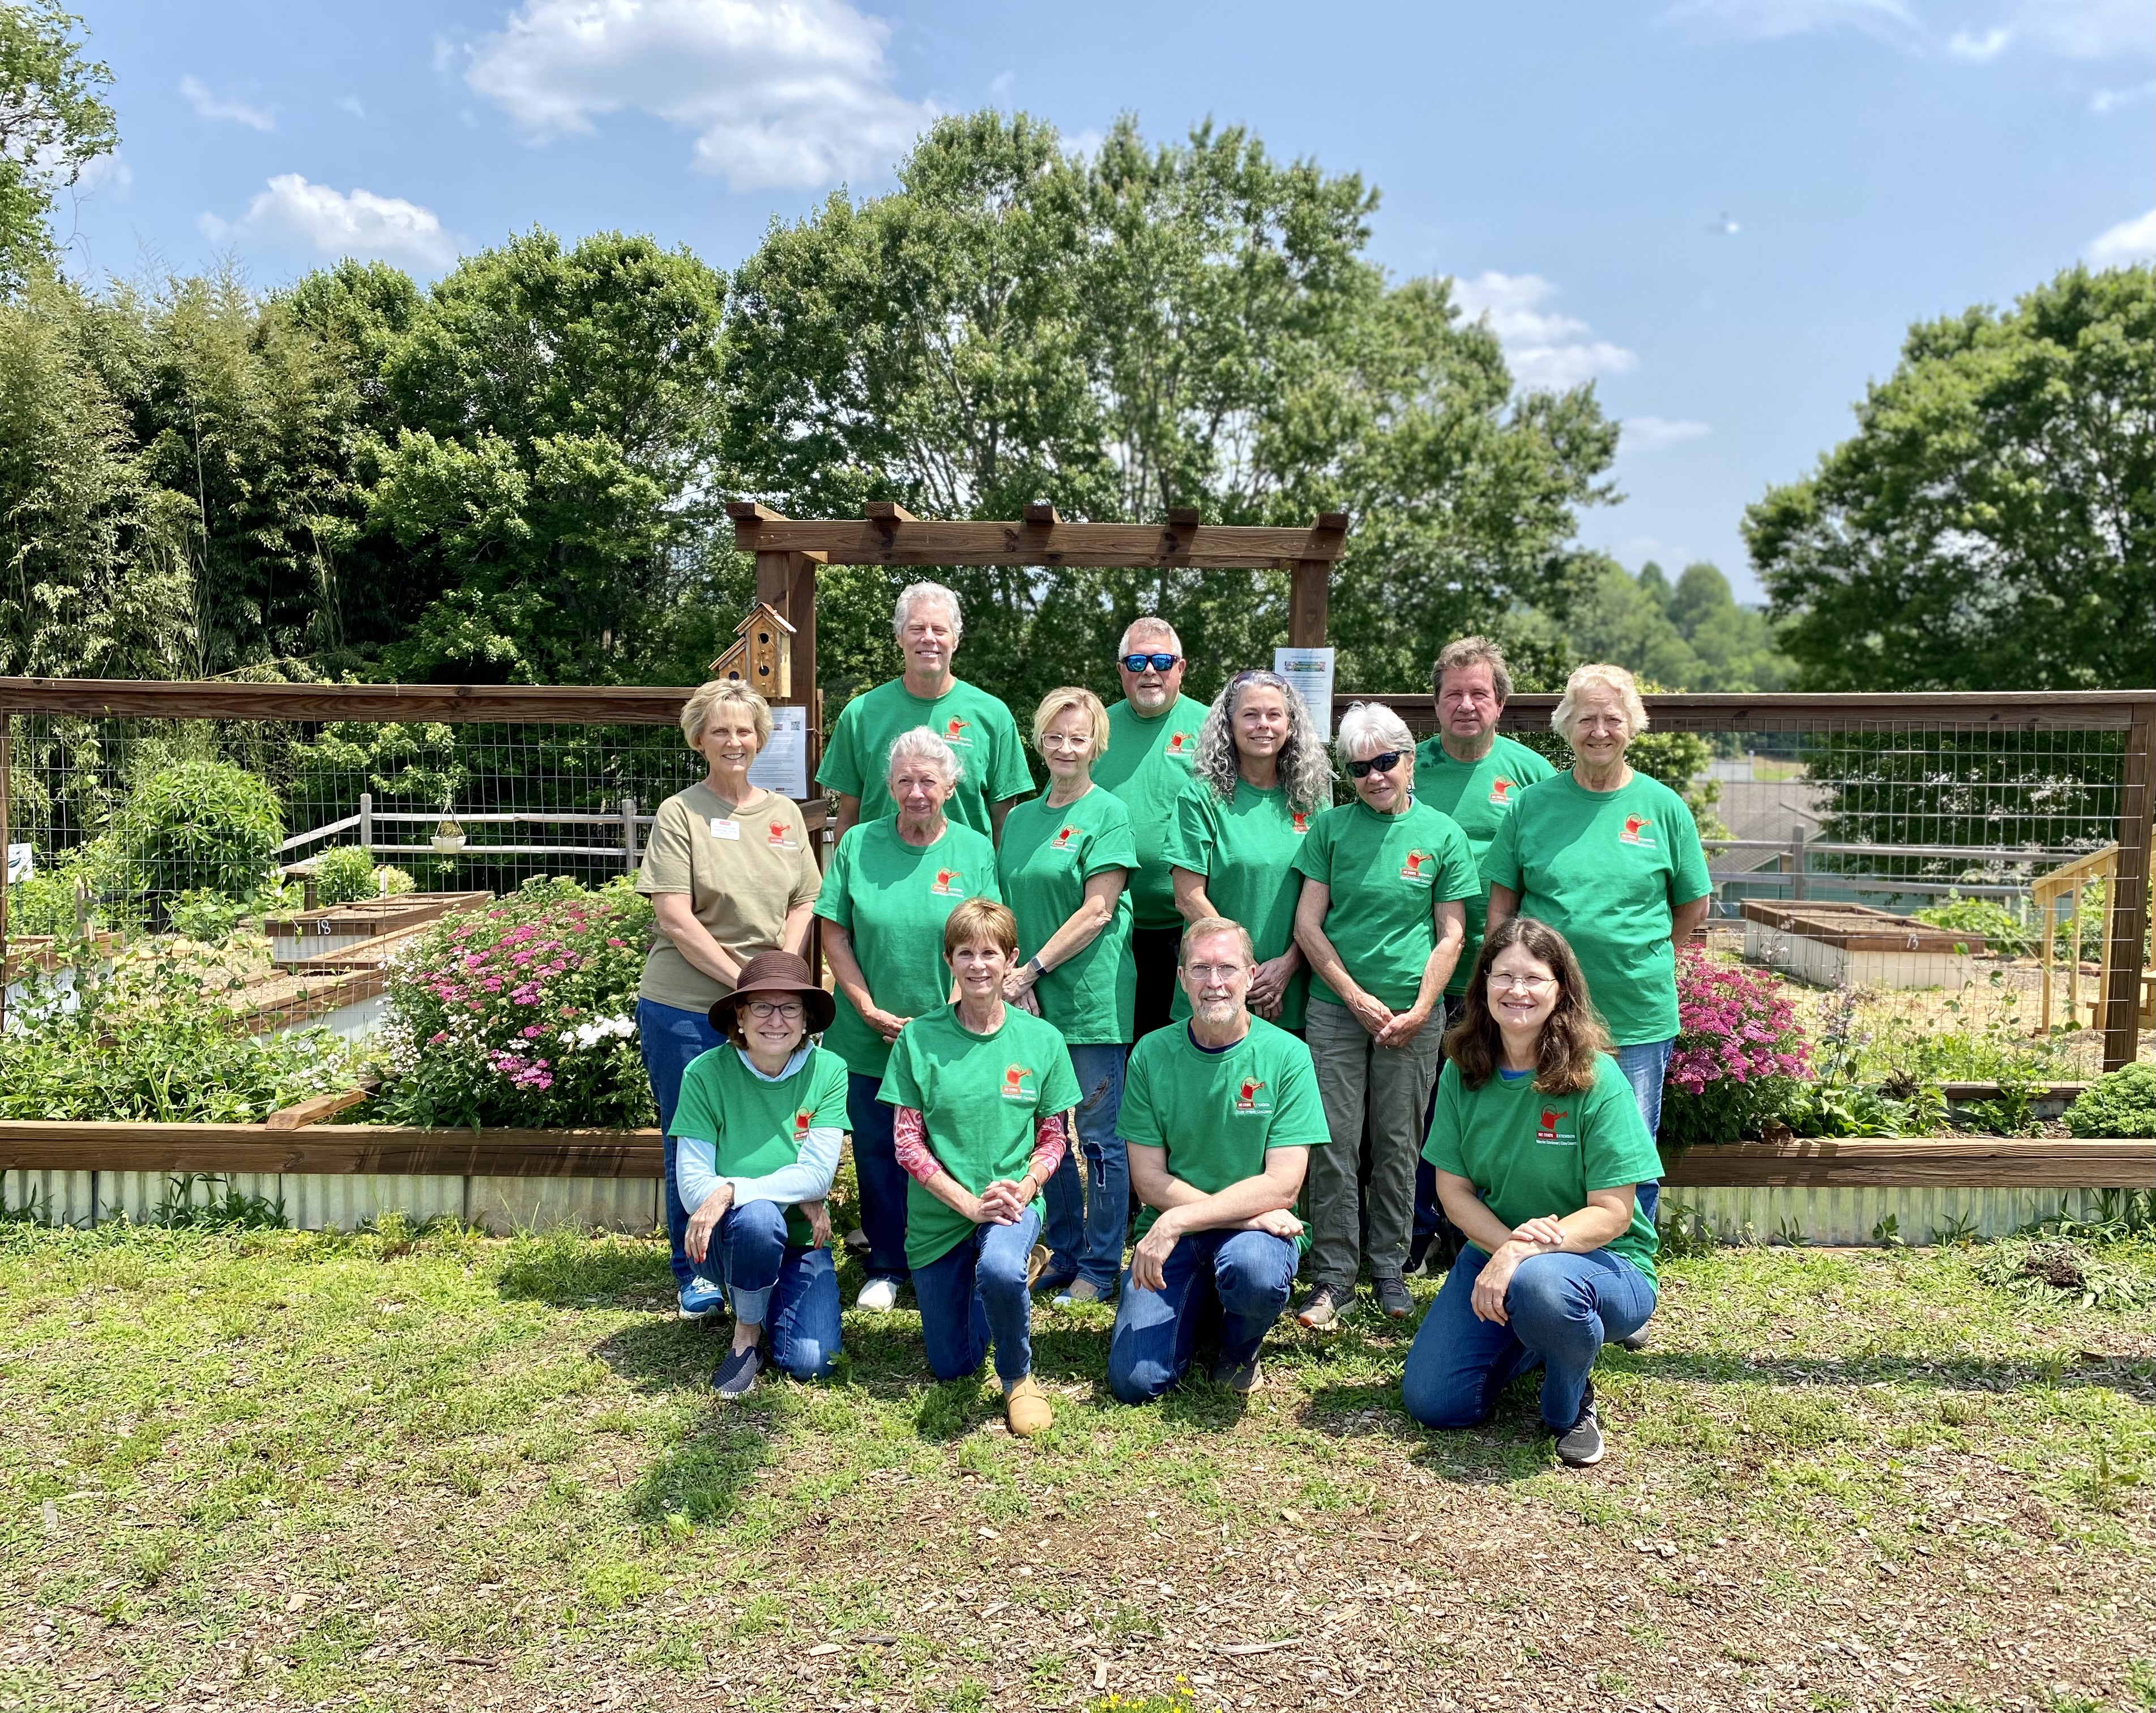 A group of adults in green shirts standing in front of a garden.